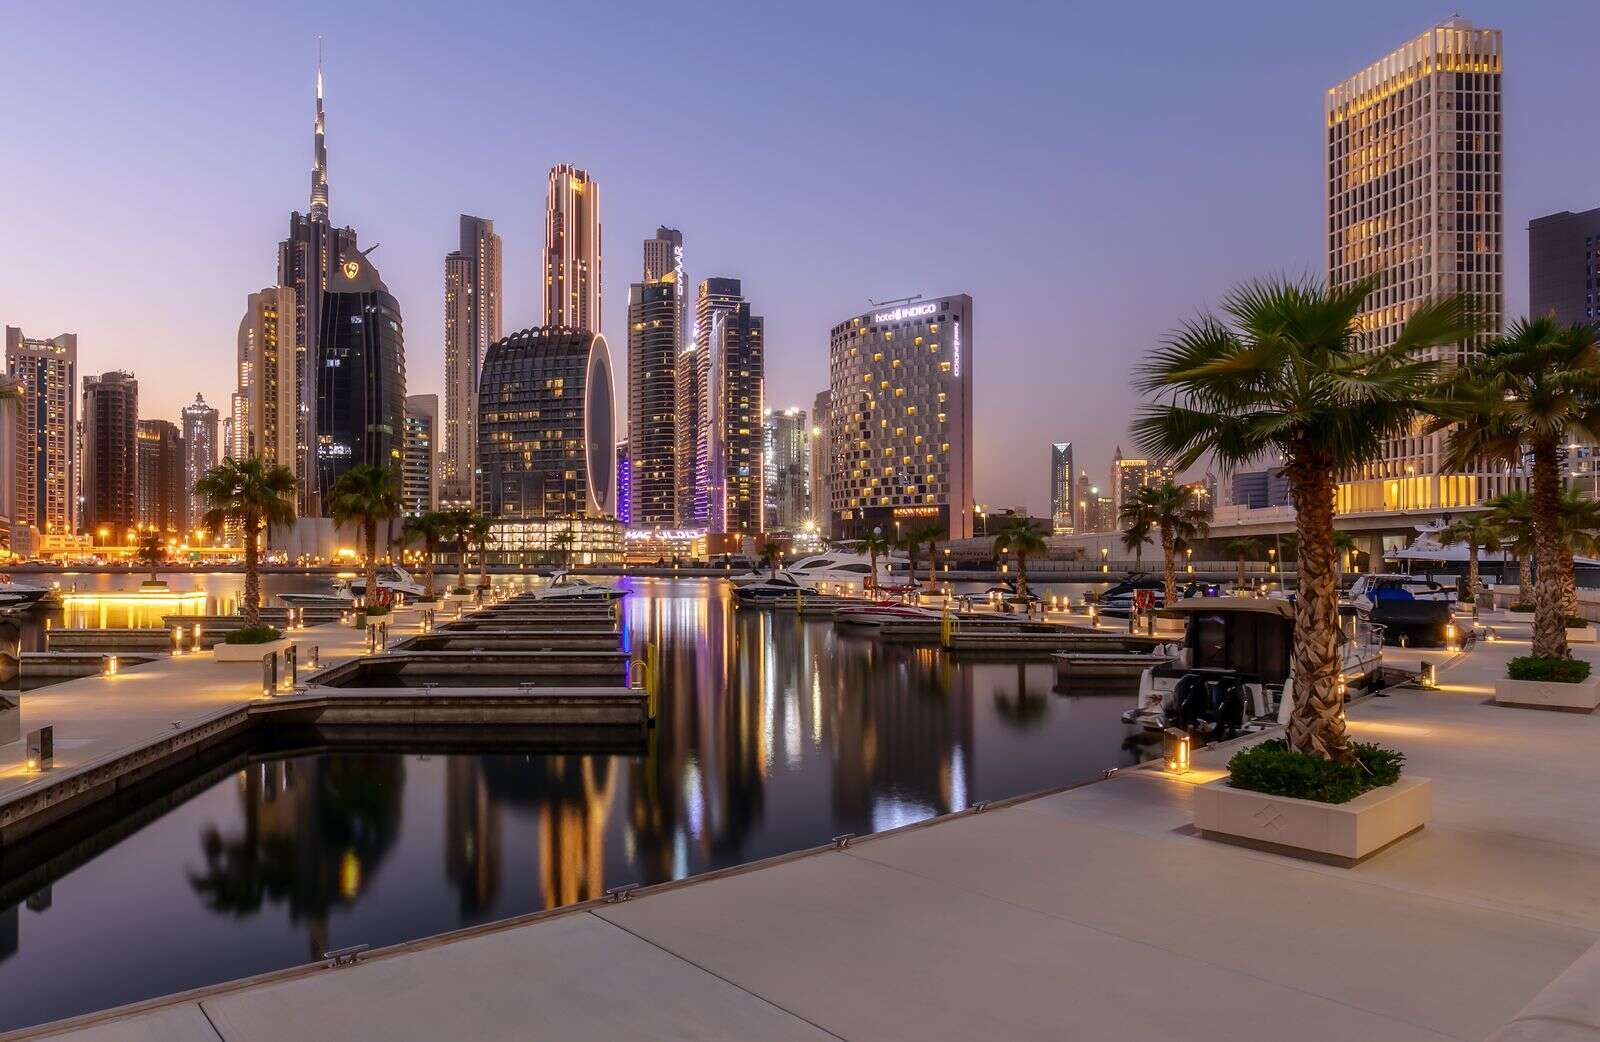 dubai: hotel demand outpaces supply as tourists flock to emirate, says tourism chief